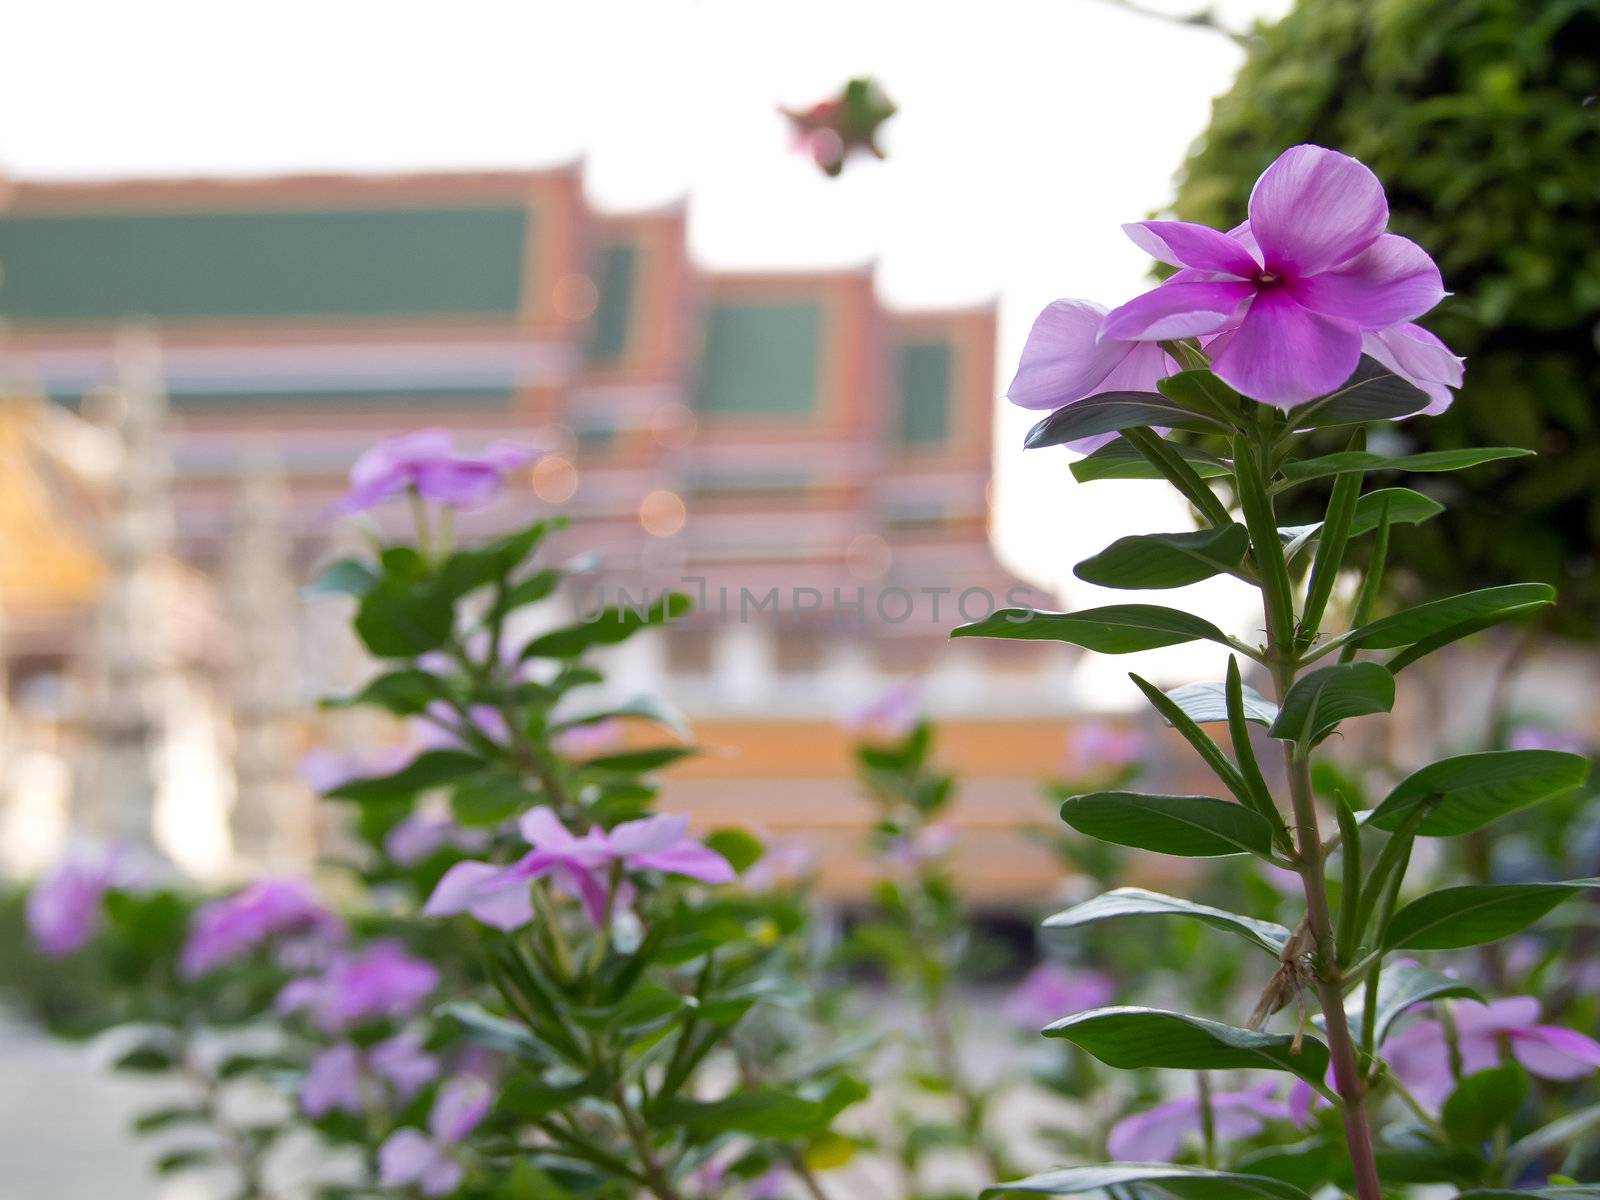 purple flowers and wat sutat temple in background.